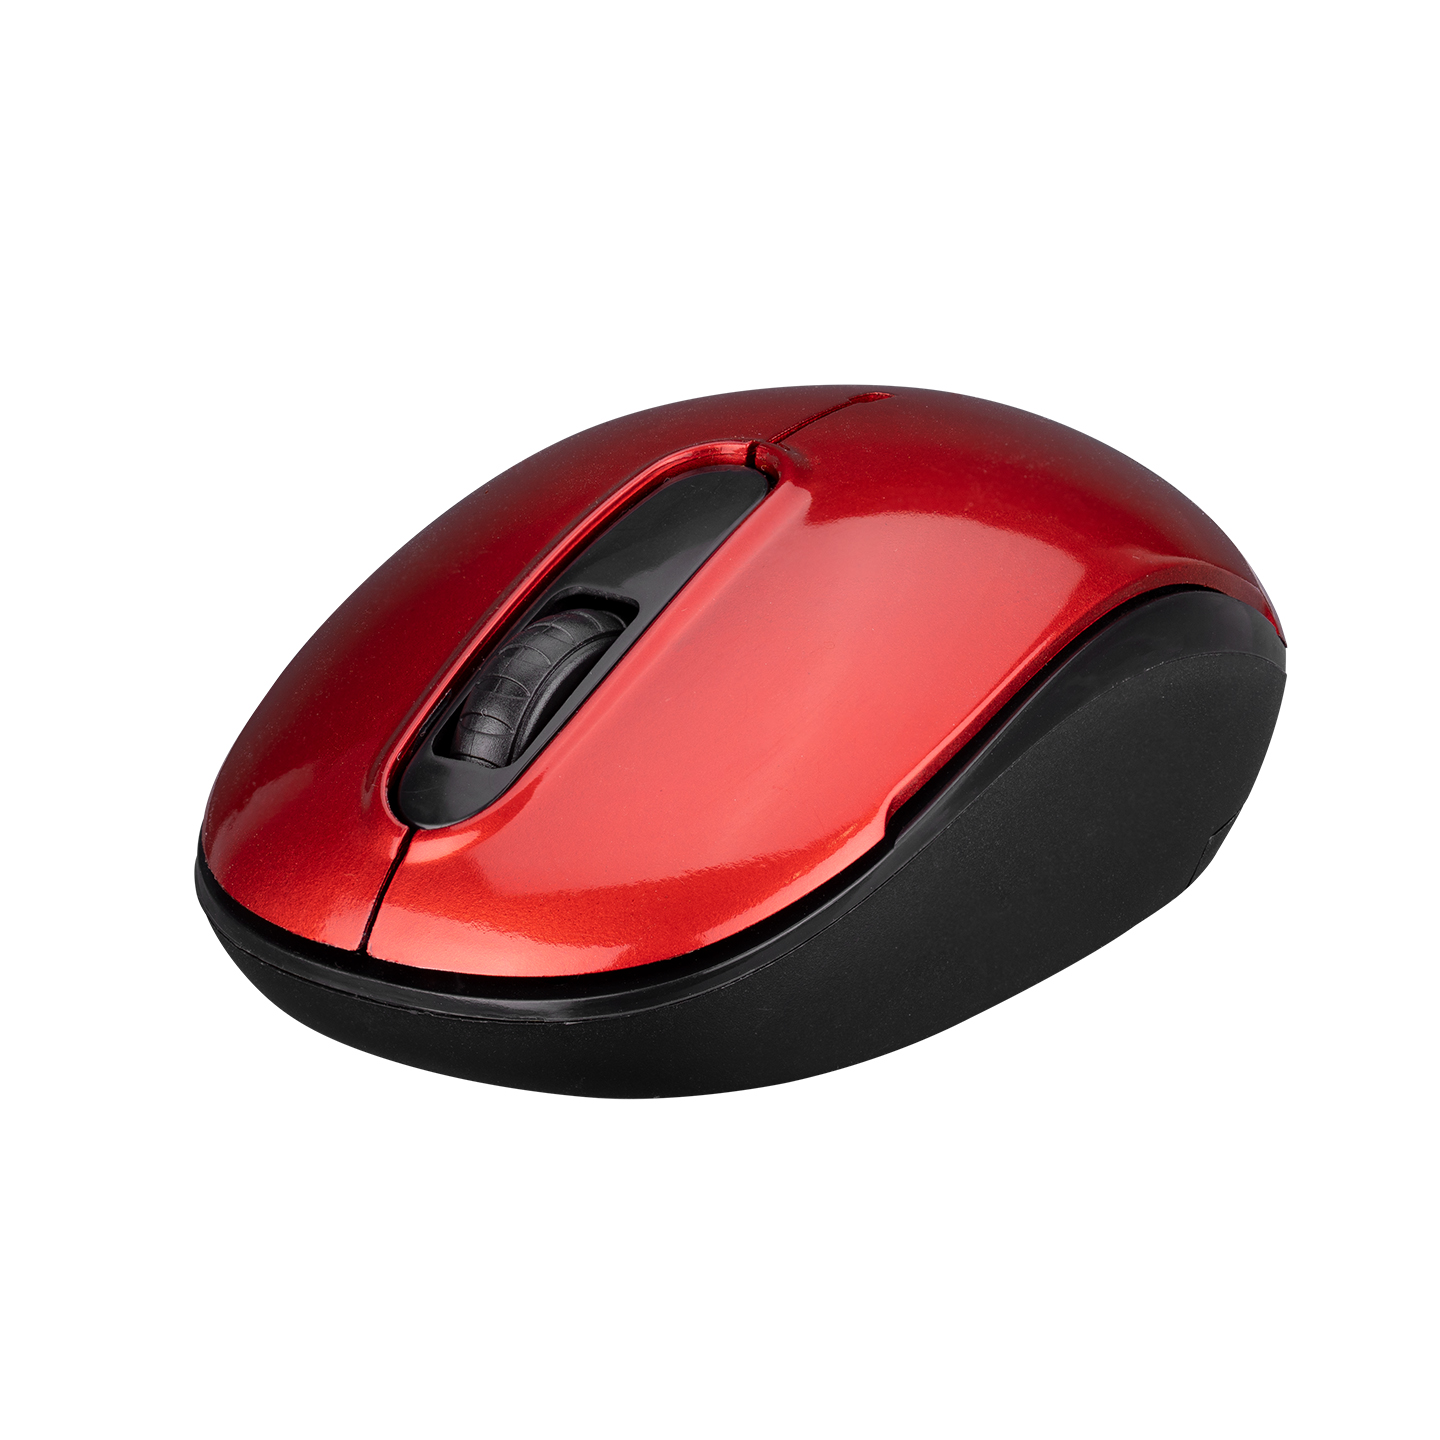 Everest SMW-666 Usb Red 2.4Ghz Optical Wireless Mouse